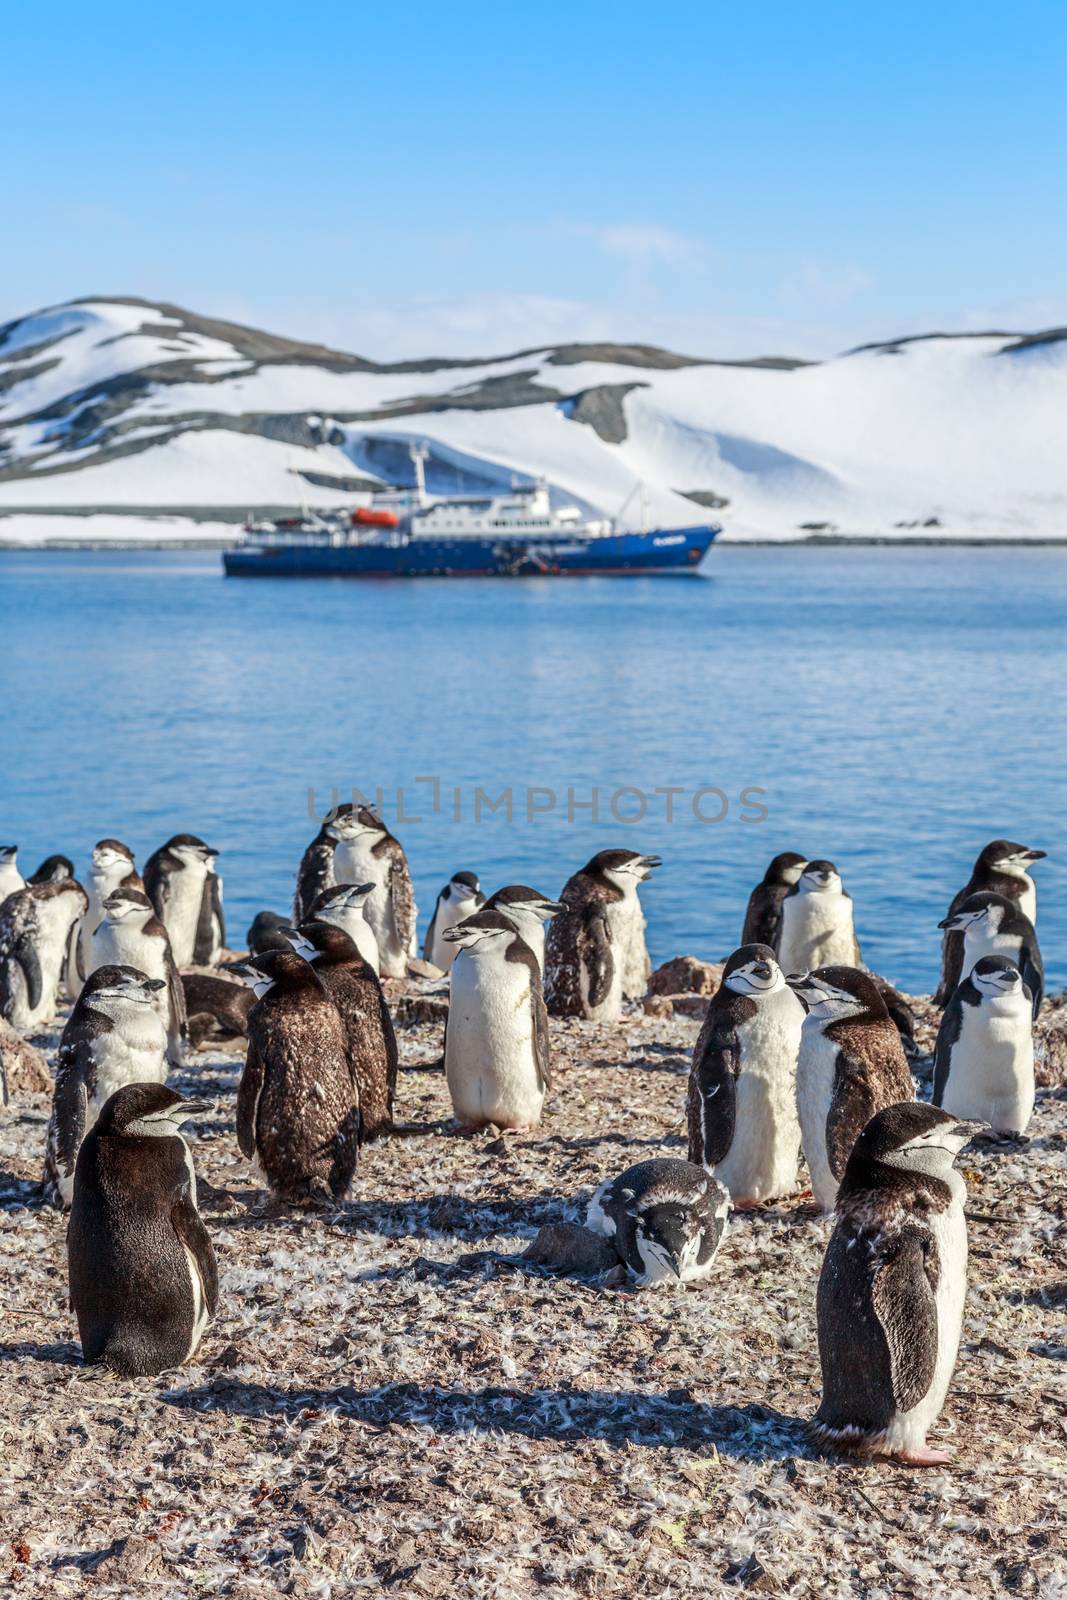 Gentoo penguins standing on the rocks and cruise ship in the background at Neco bay, Antarctica